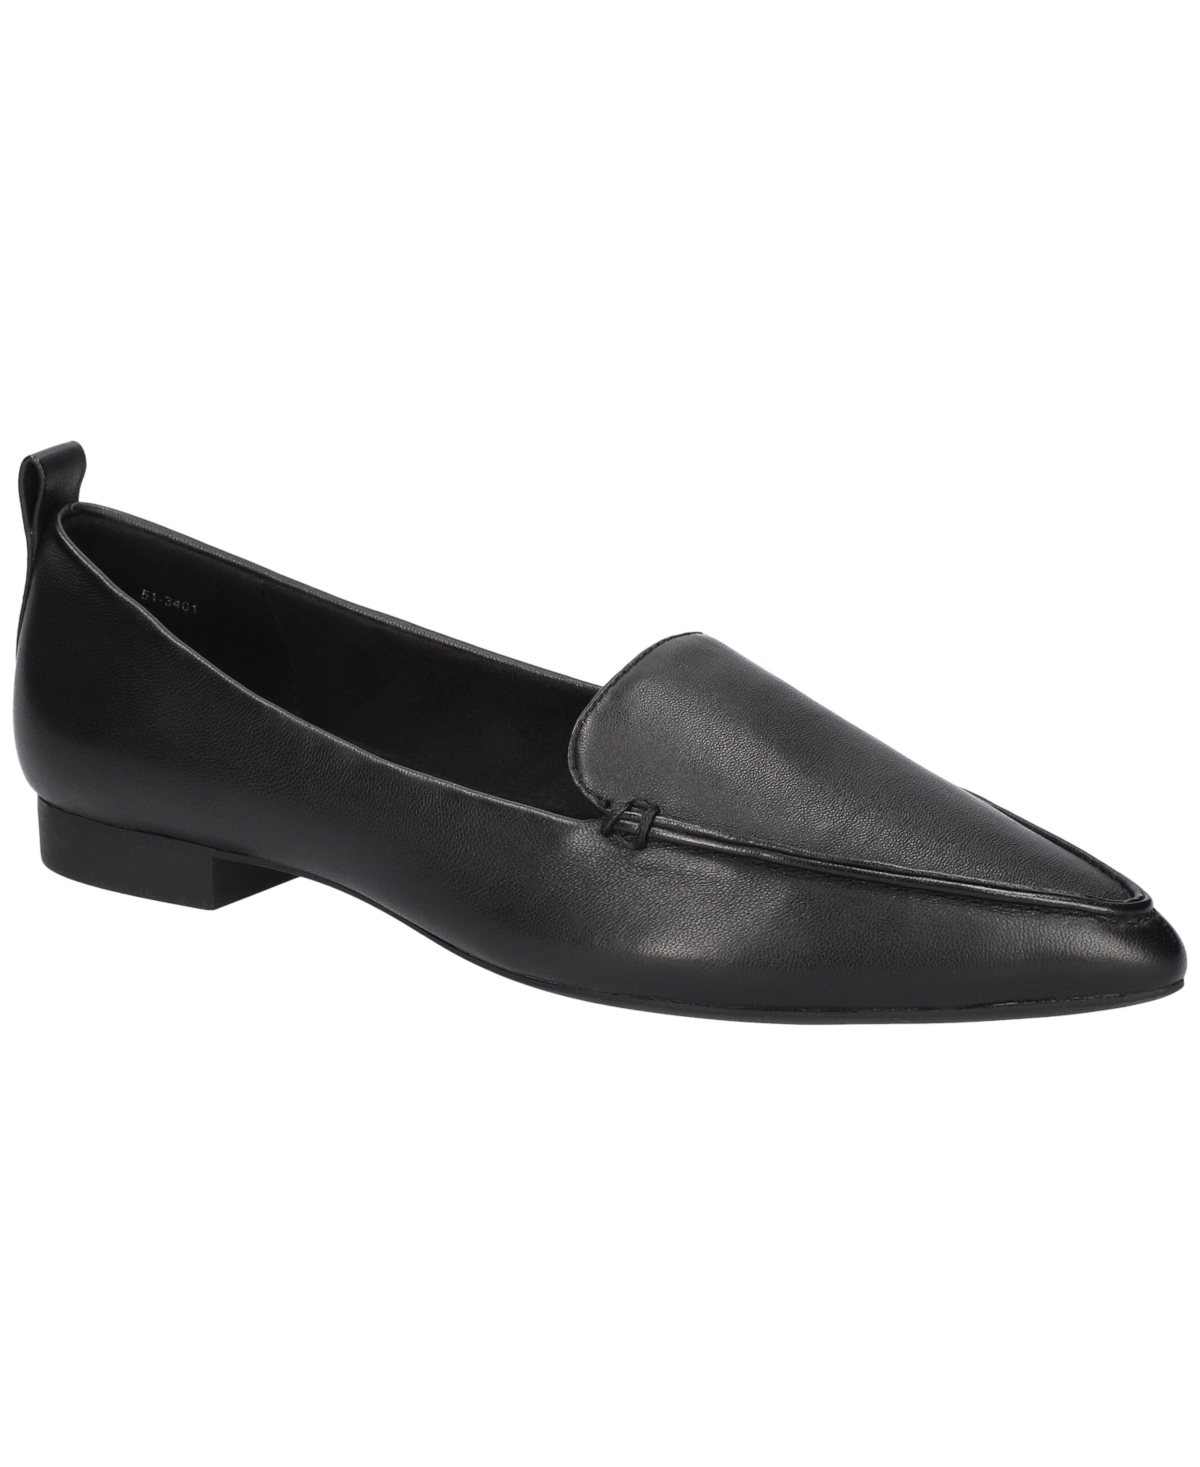 Women's Alessi Pointed Toe Flats - Gray Suede Leather